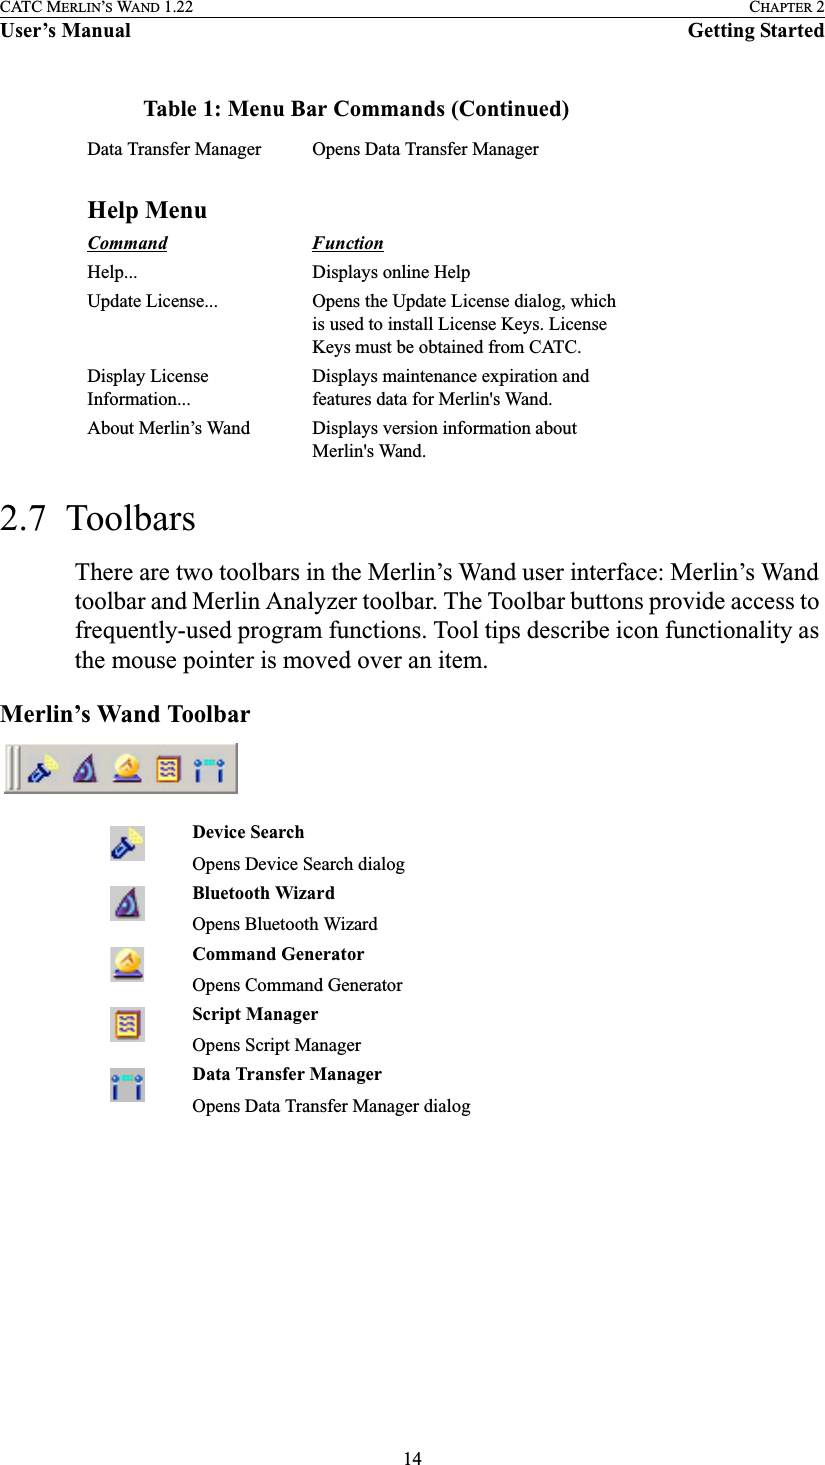 14CATC MERLIN’S WAND 1.22 CHAPTER 2User’s Manual Getting Started2.7  ToolbarsThere are two toolbars in the Merlin’s Wand user interface: Merlin’s Wand toolbar and Merlin Analyzer toolbar. The Toolbar buttons provide access to frequently-used program functions. Tool tips describe icon functionality as the mouse pointer is moved over an item. Merlin’s Wand Toolbar Data Transfer Manager Opens Data Transfer ManagerHelp MenuCommand FunctionHelp... Displays online HelpUpdate License... Opens the Update License dialog, which is used to install License Keys. License Keys must be obtained from CATC.Display License Information...Displays maintenance expiration and features data for Merlin&apos;s Wand.About Merlin’s Wand Displays version information about Merlin&apos;s Wand.Device SearchOpens Device Search dialogBluetooth WizardOpens Bluetooth Wizard Command GeneratorOpens Command Generator Script ManagerOpens Script Manager Data Transfer ManagerOpens Data Transfer Manager dialogTable 1: Menu Bar Commands (Continued)